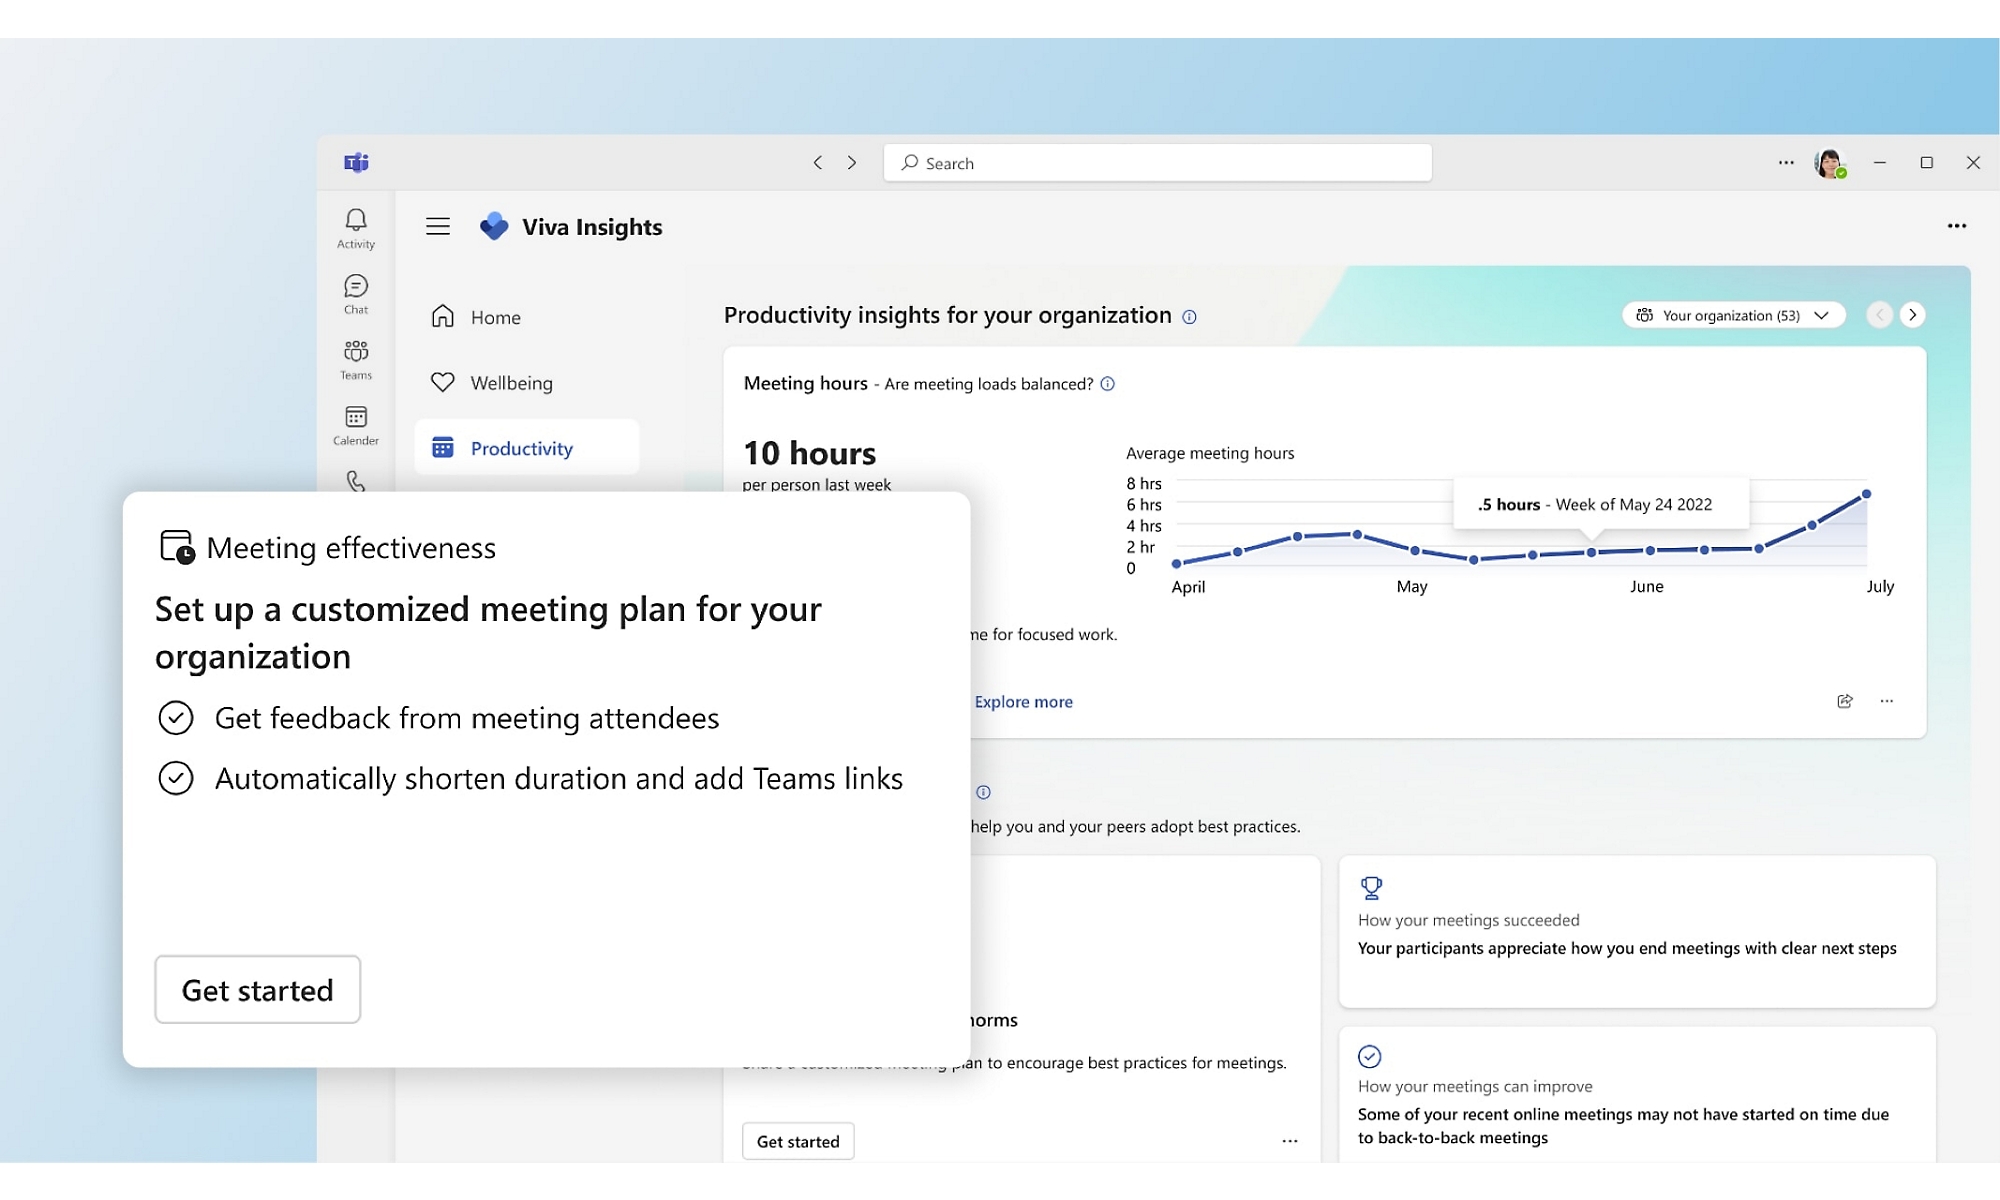 A meeting effectiveness reminder popped out over Viva Insights in Teams